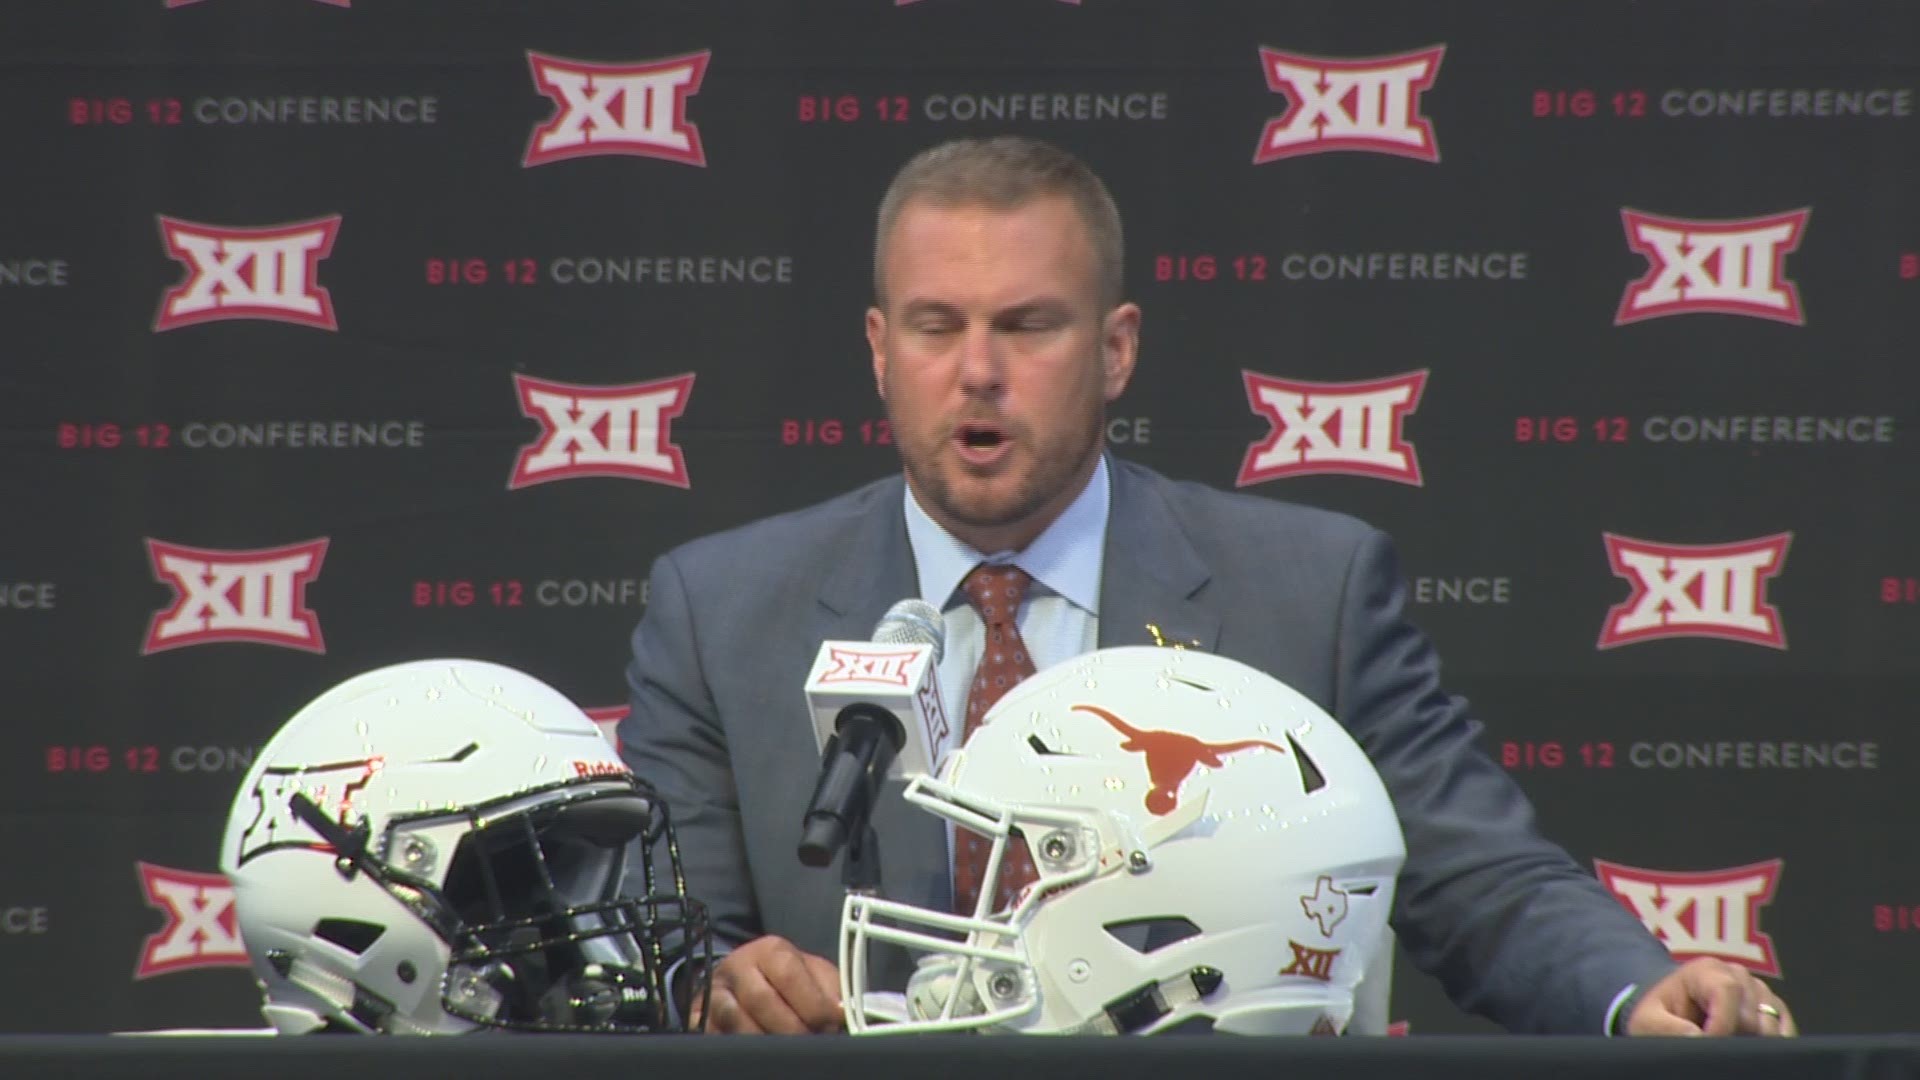 Coming off a 7-6 first season, Texas football Coach Tom Herman is emphasizing ""develop" and "finish" as the key words for the 2018 Longhorns. Here's some of what Herman had to say.